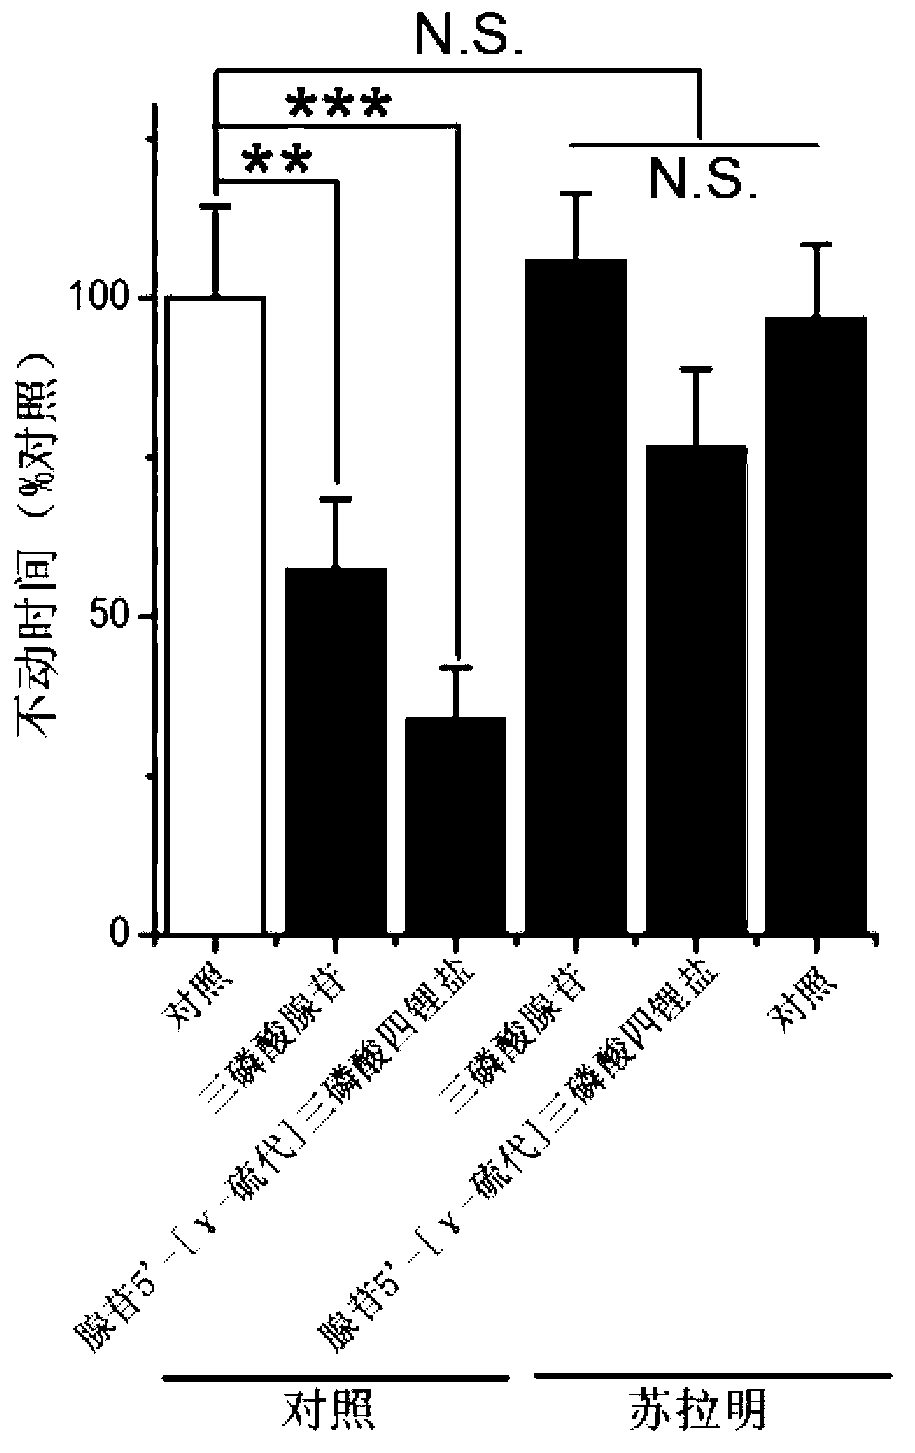 Application of P2X2 receptor agonist or opening agent in preparation of anti-depression or anti-anxiety drugs